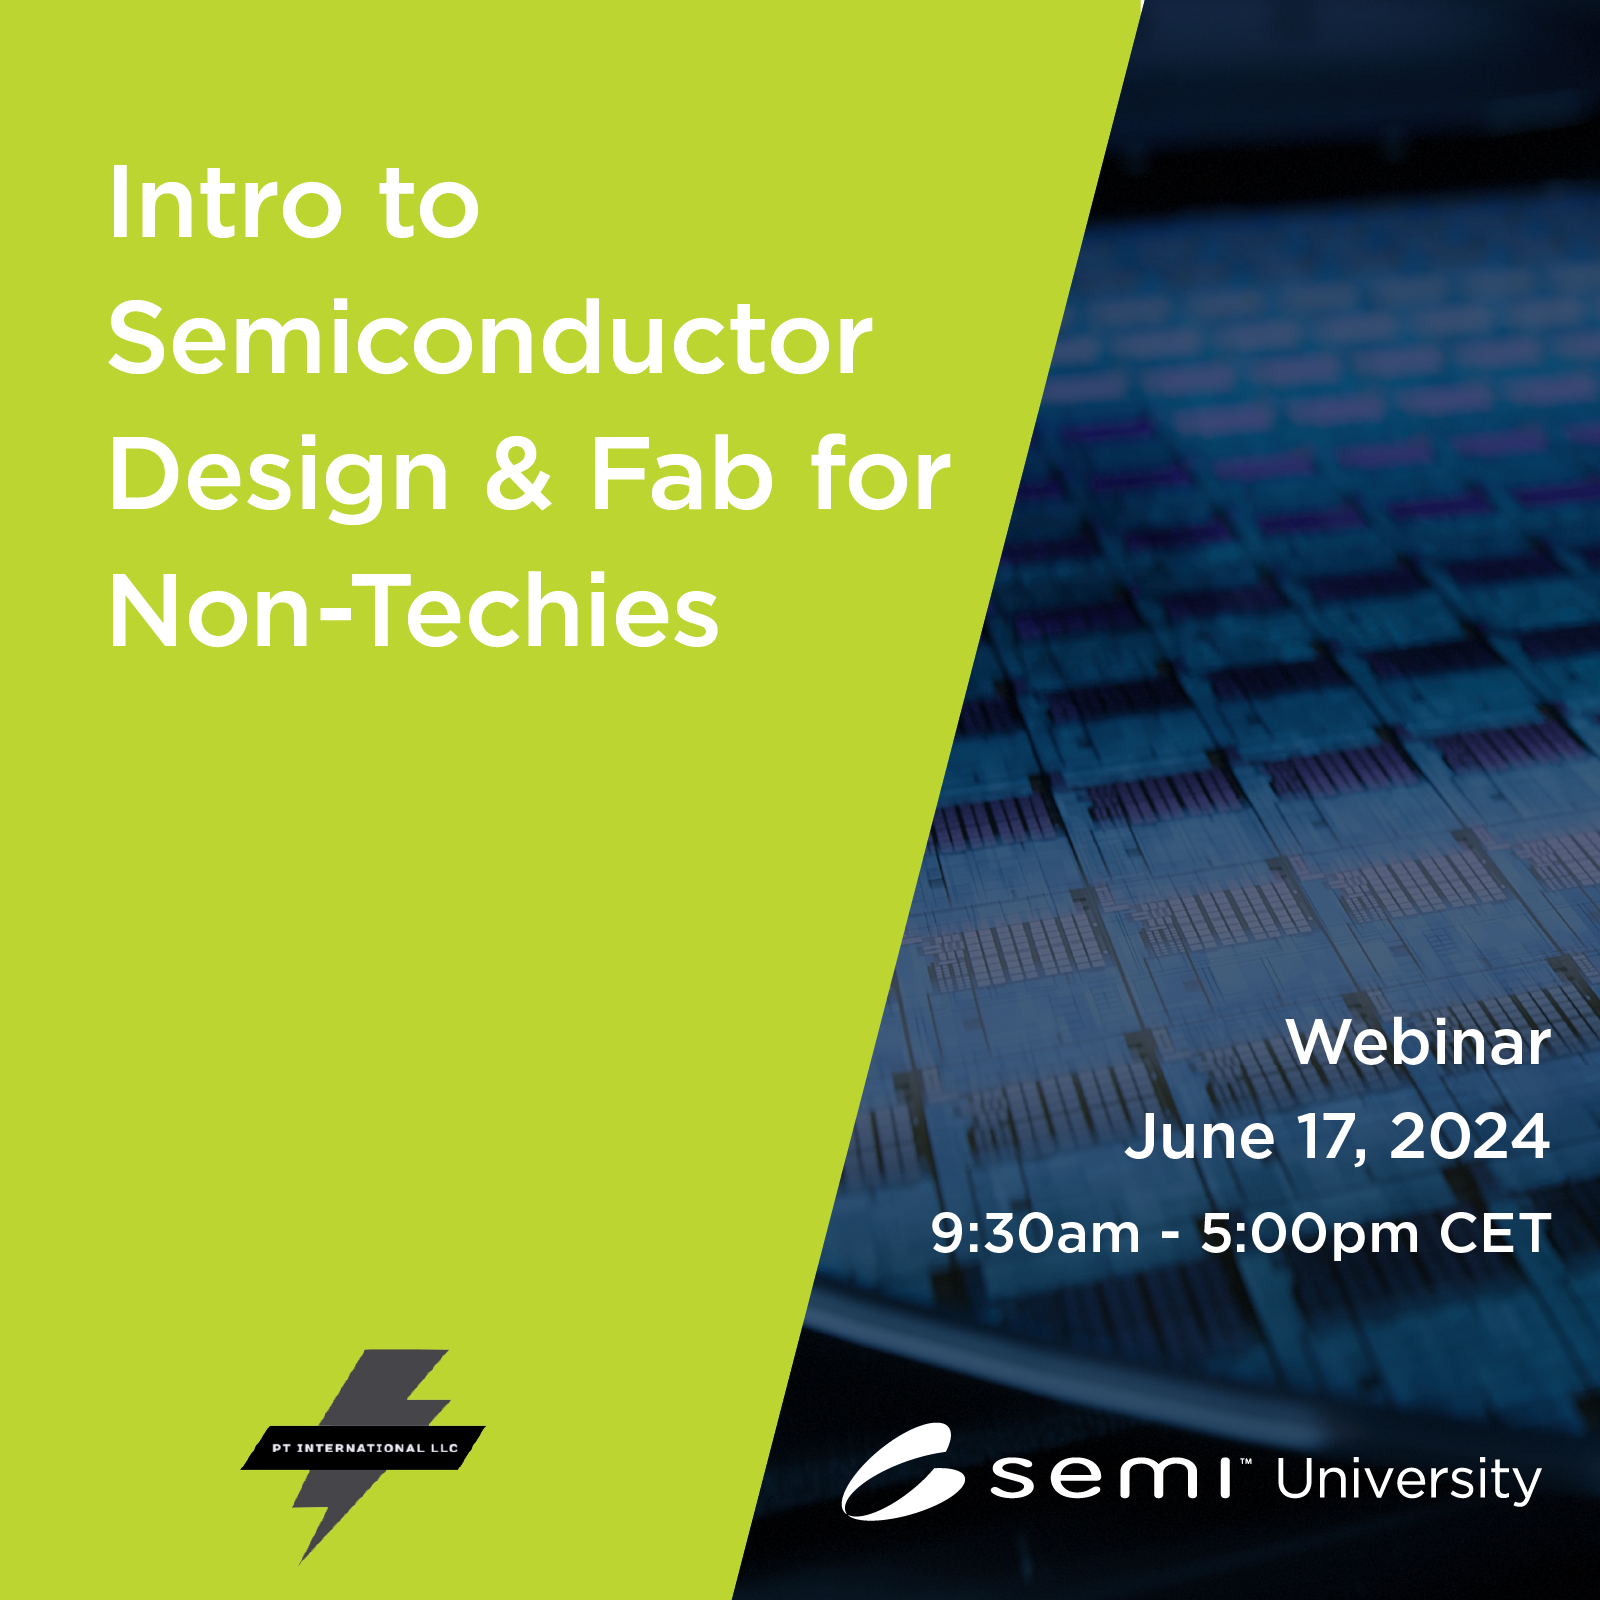 Intro to Semiconductor Design & Fab for Non-Techies June - Europe